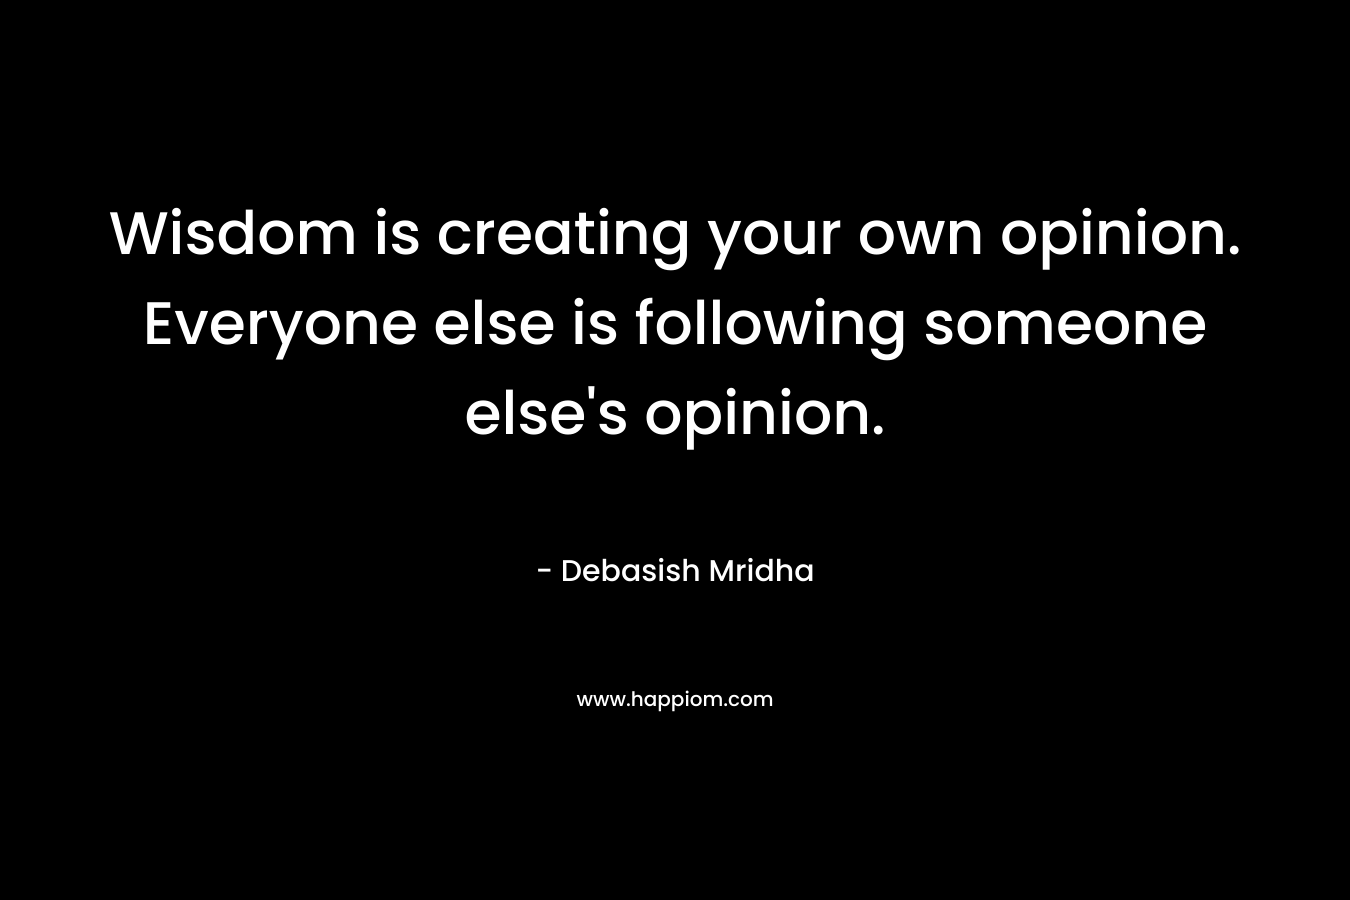 Wisdom is creating your own opinion. Everyone else is following someone else's opinion.